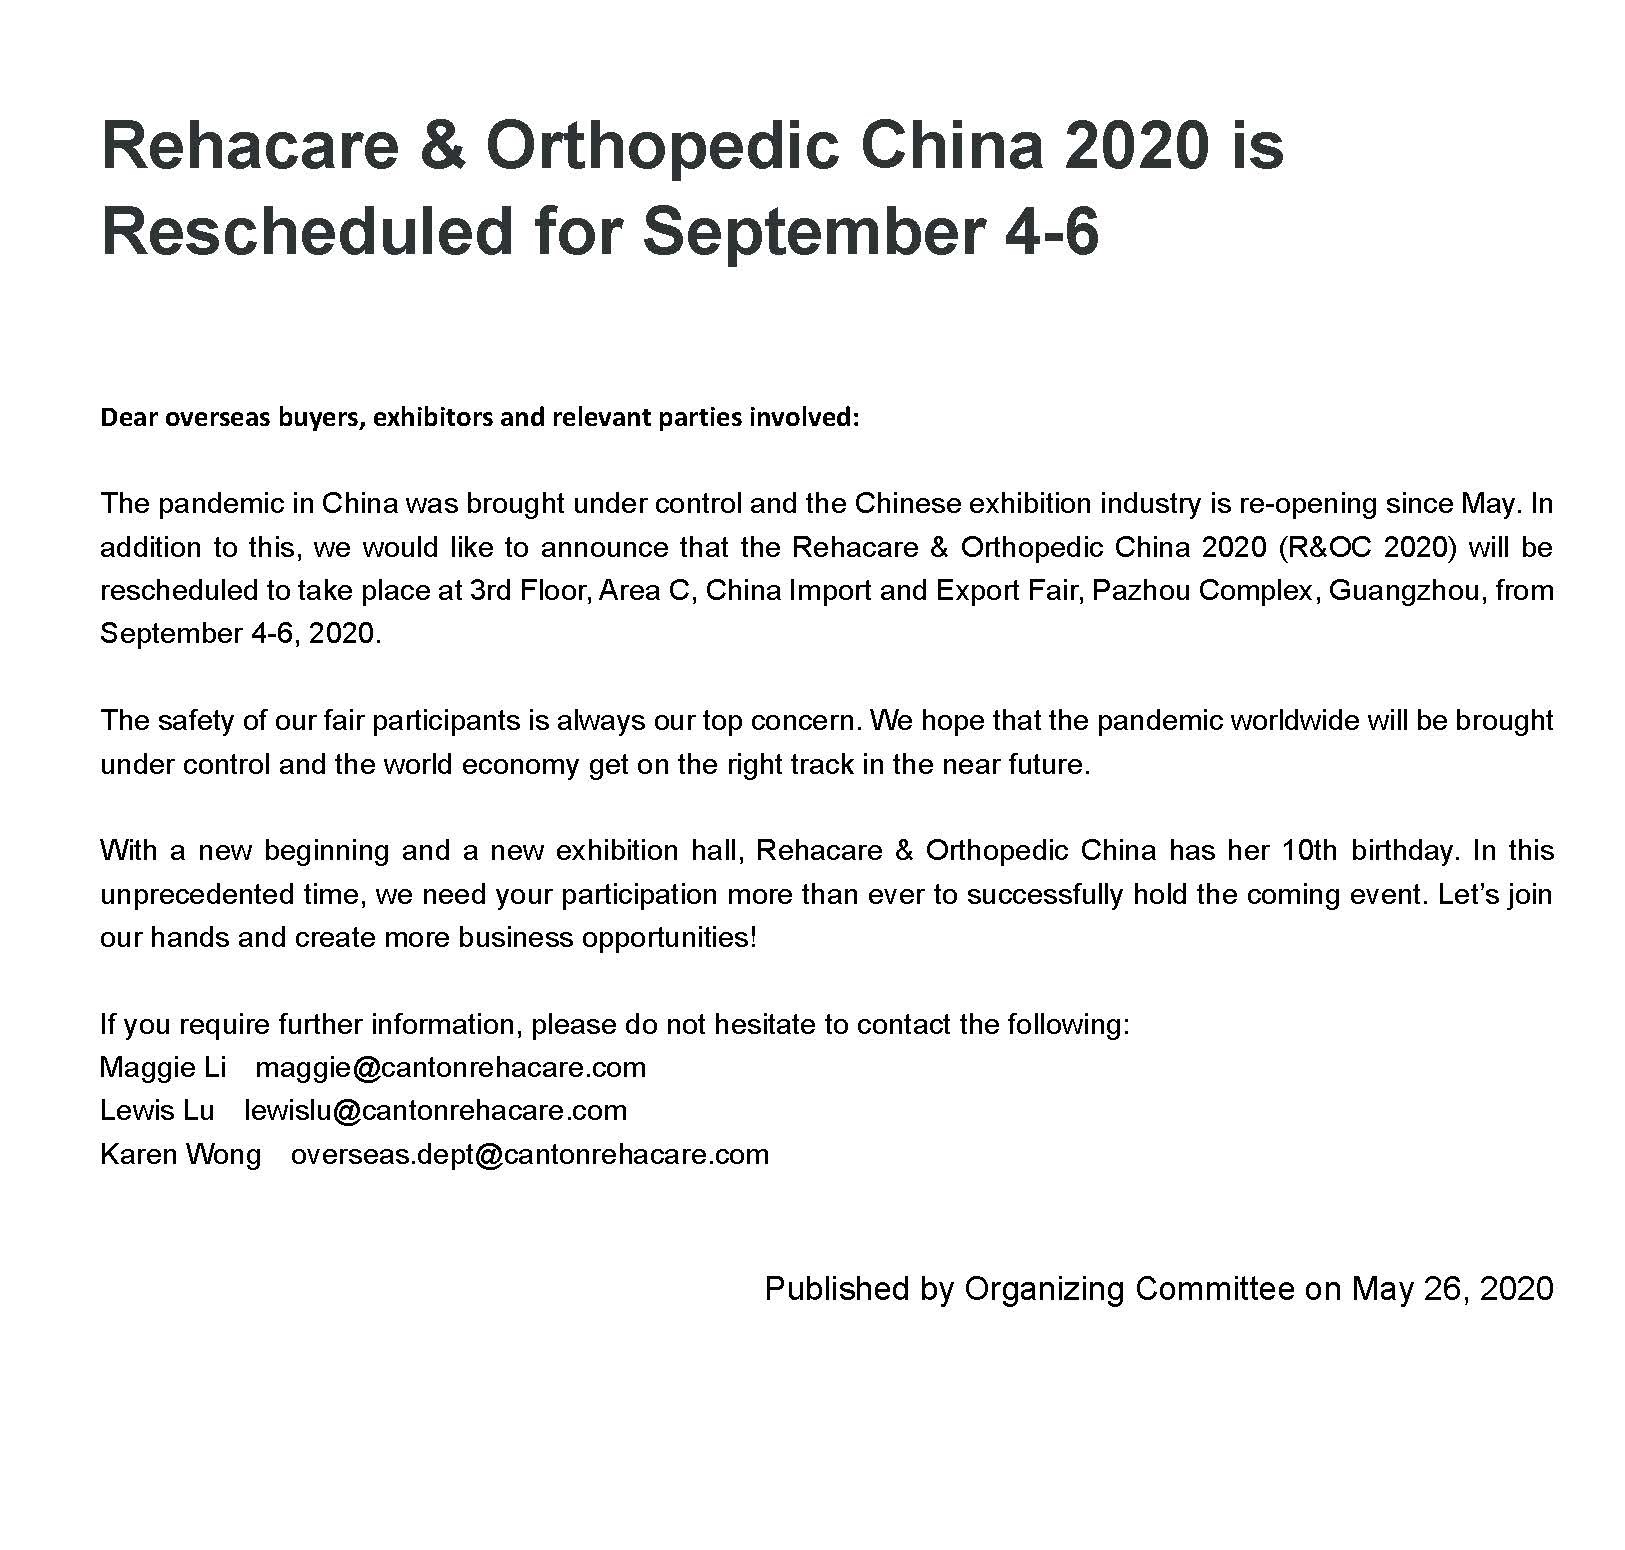 Rehacare & Orthopedic China 2020 is Rescheduled for September 4-6